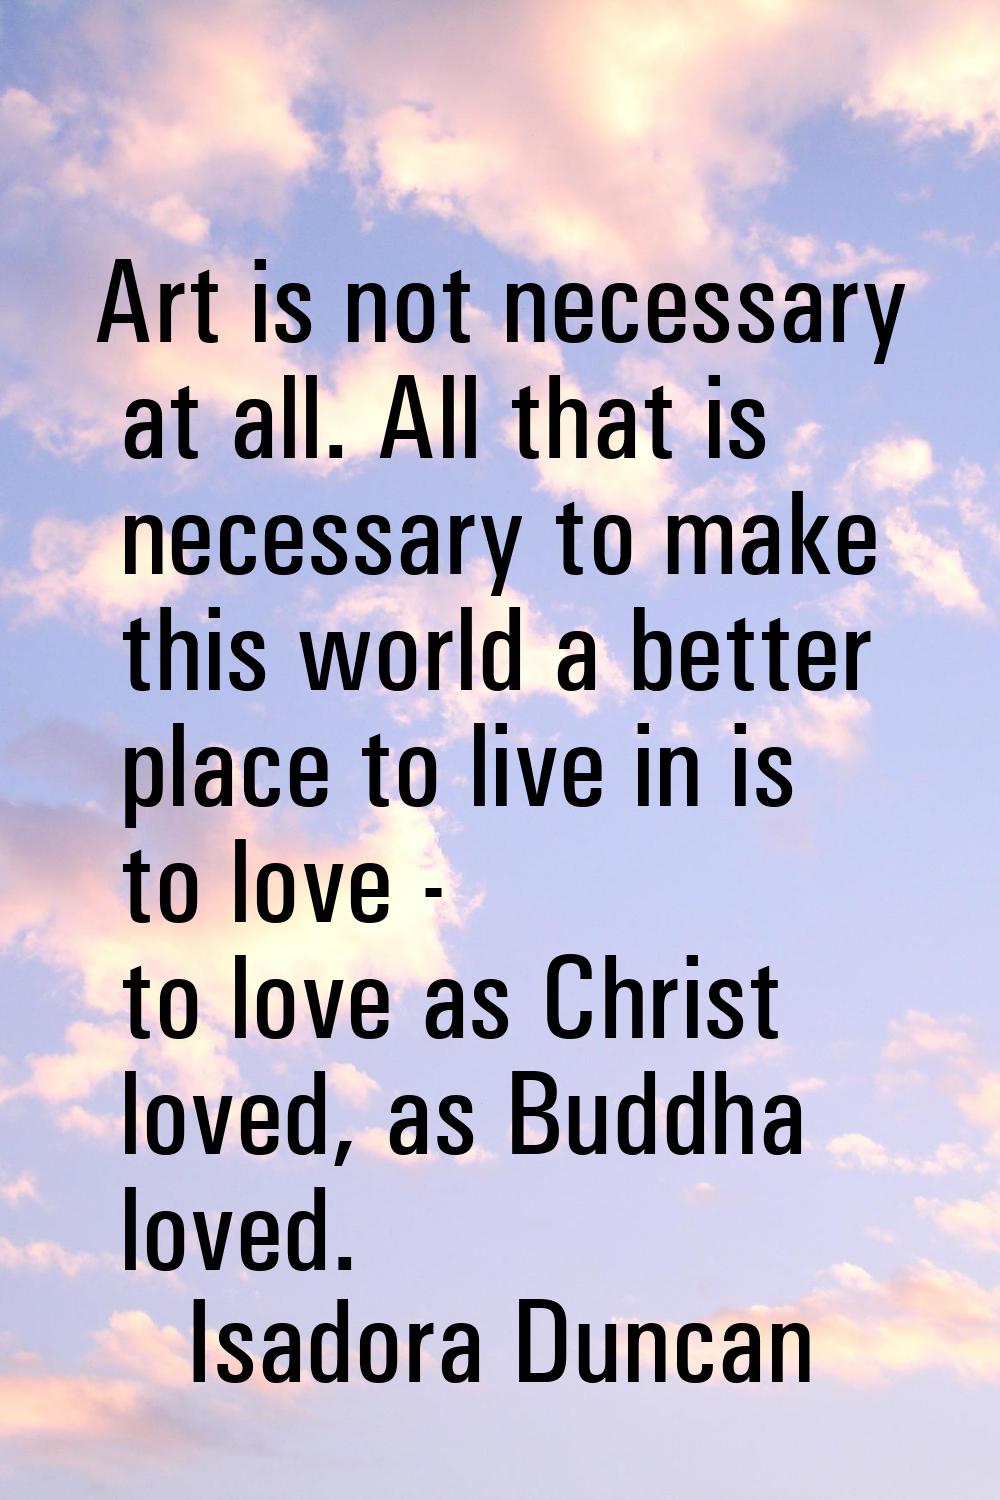 Art is not necessary at all. All that is necessary to make this world a better place to live in is 